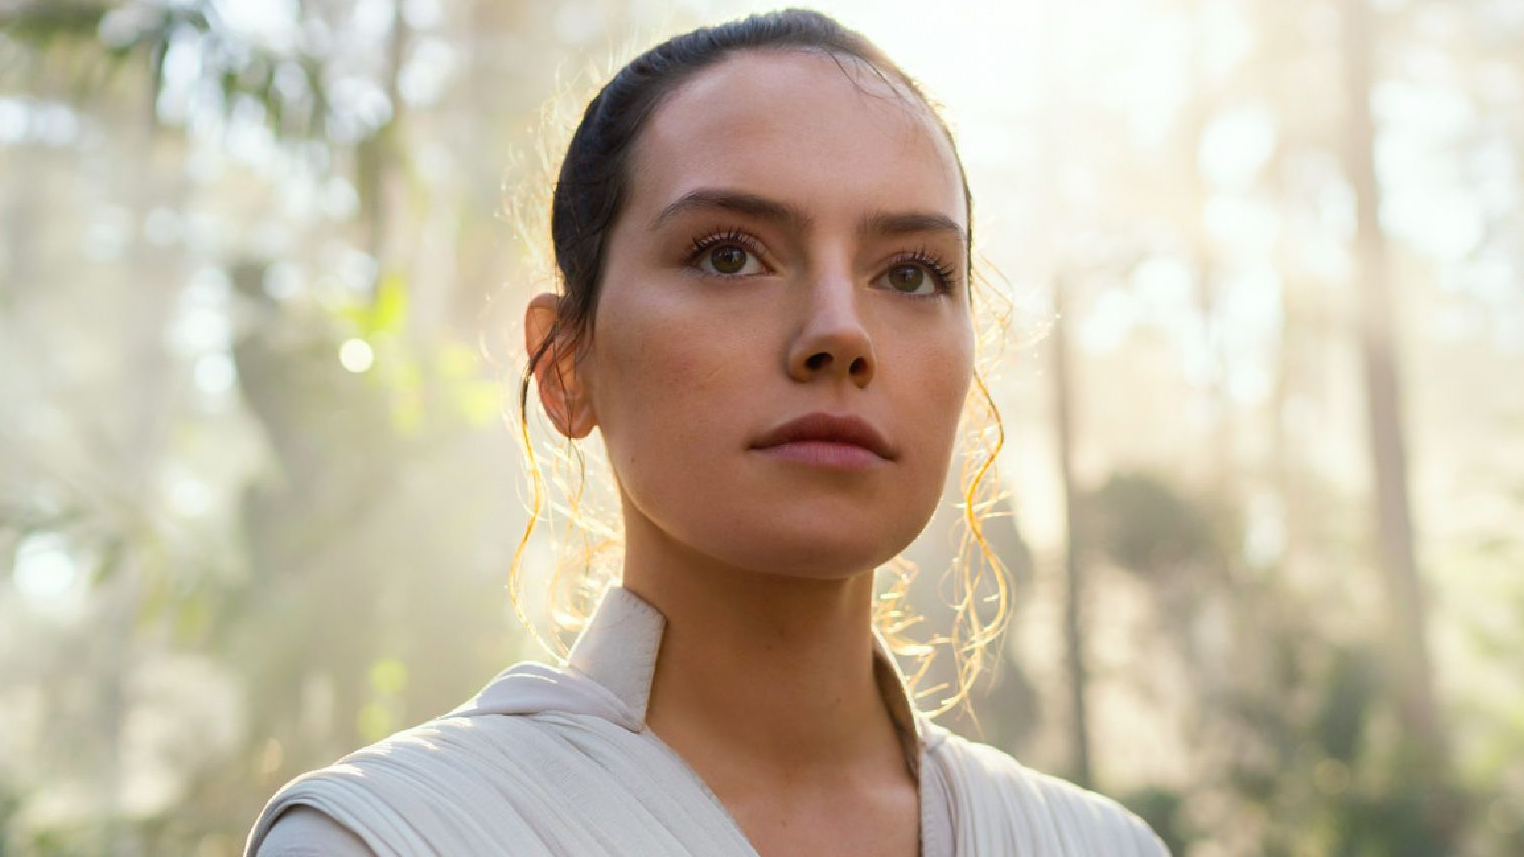 Daisy Ridley Returning To Star Wars As Rey For More Movies?